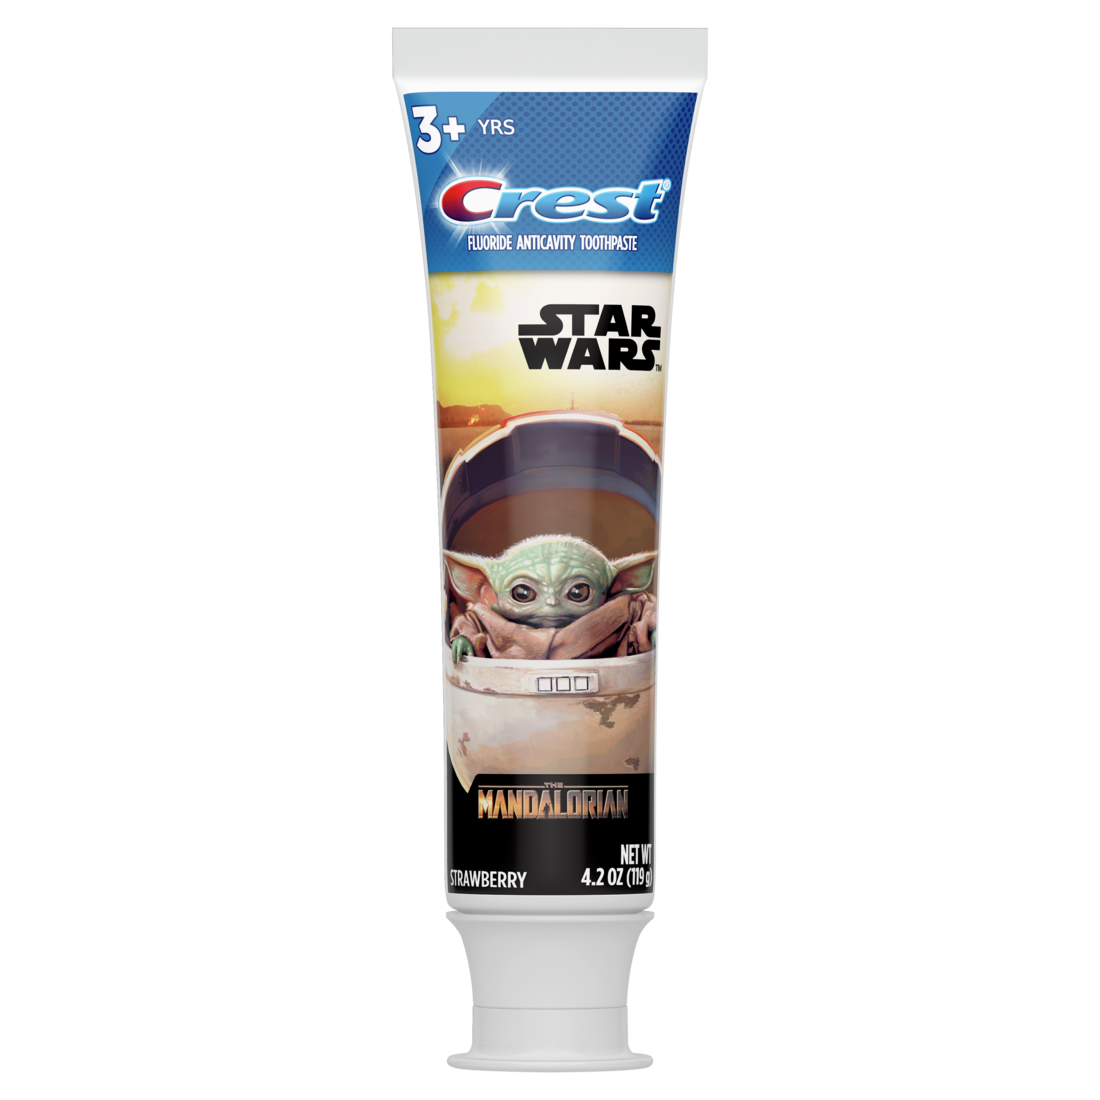 Crest Kid's Toothpaste, featuring Star Wars The Mandalorian, Strawberry Flavor - 4.2oz/6pk